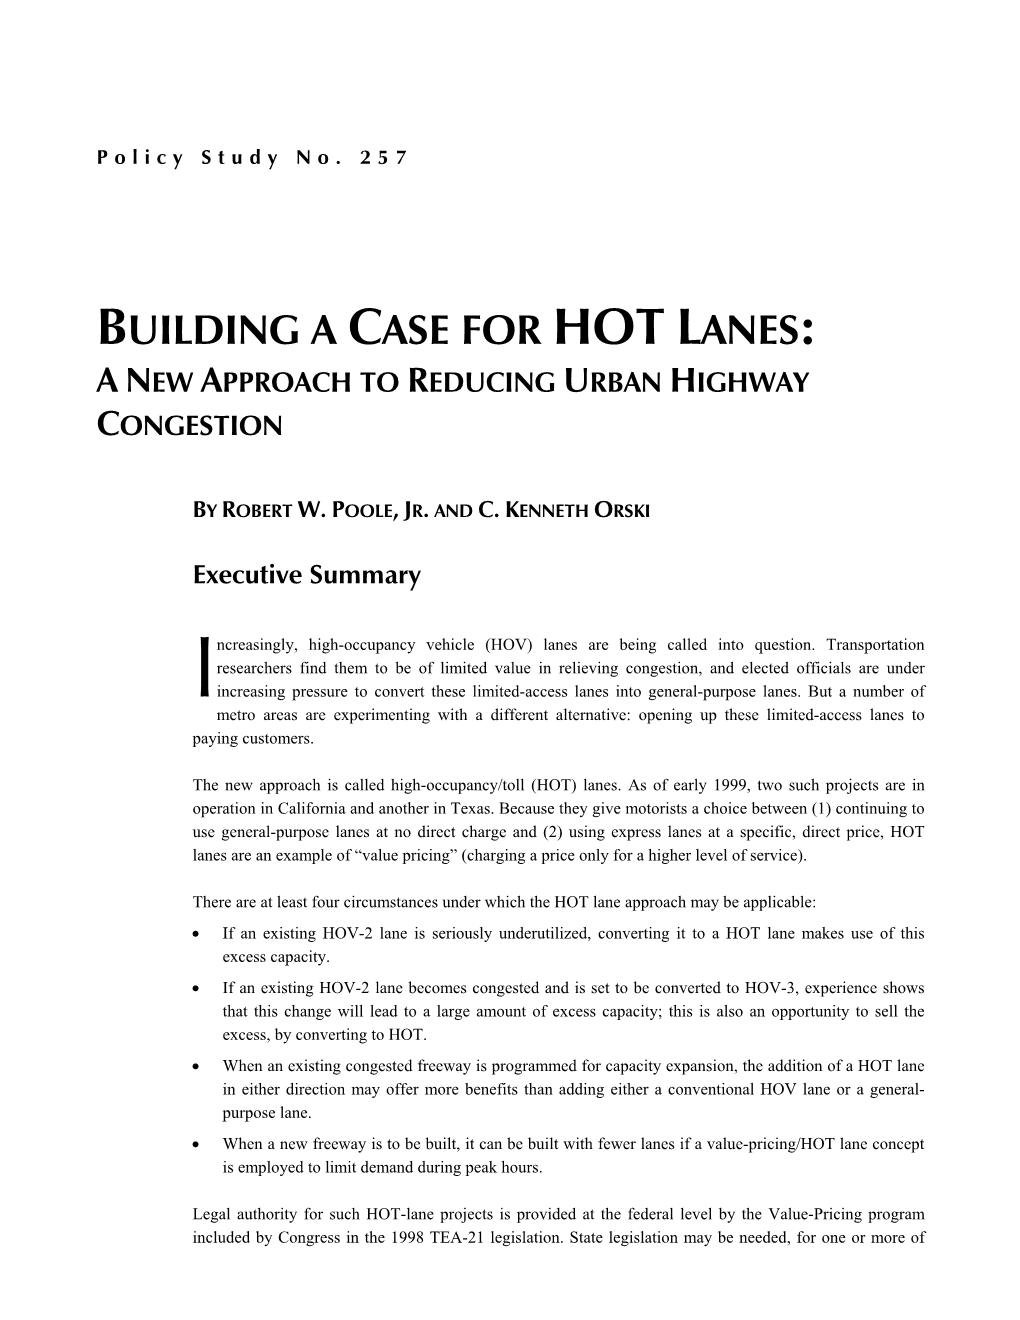 Building a Case for Hot Lanes: a New Approach to Reducing Urban Highway Congestion